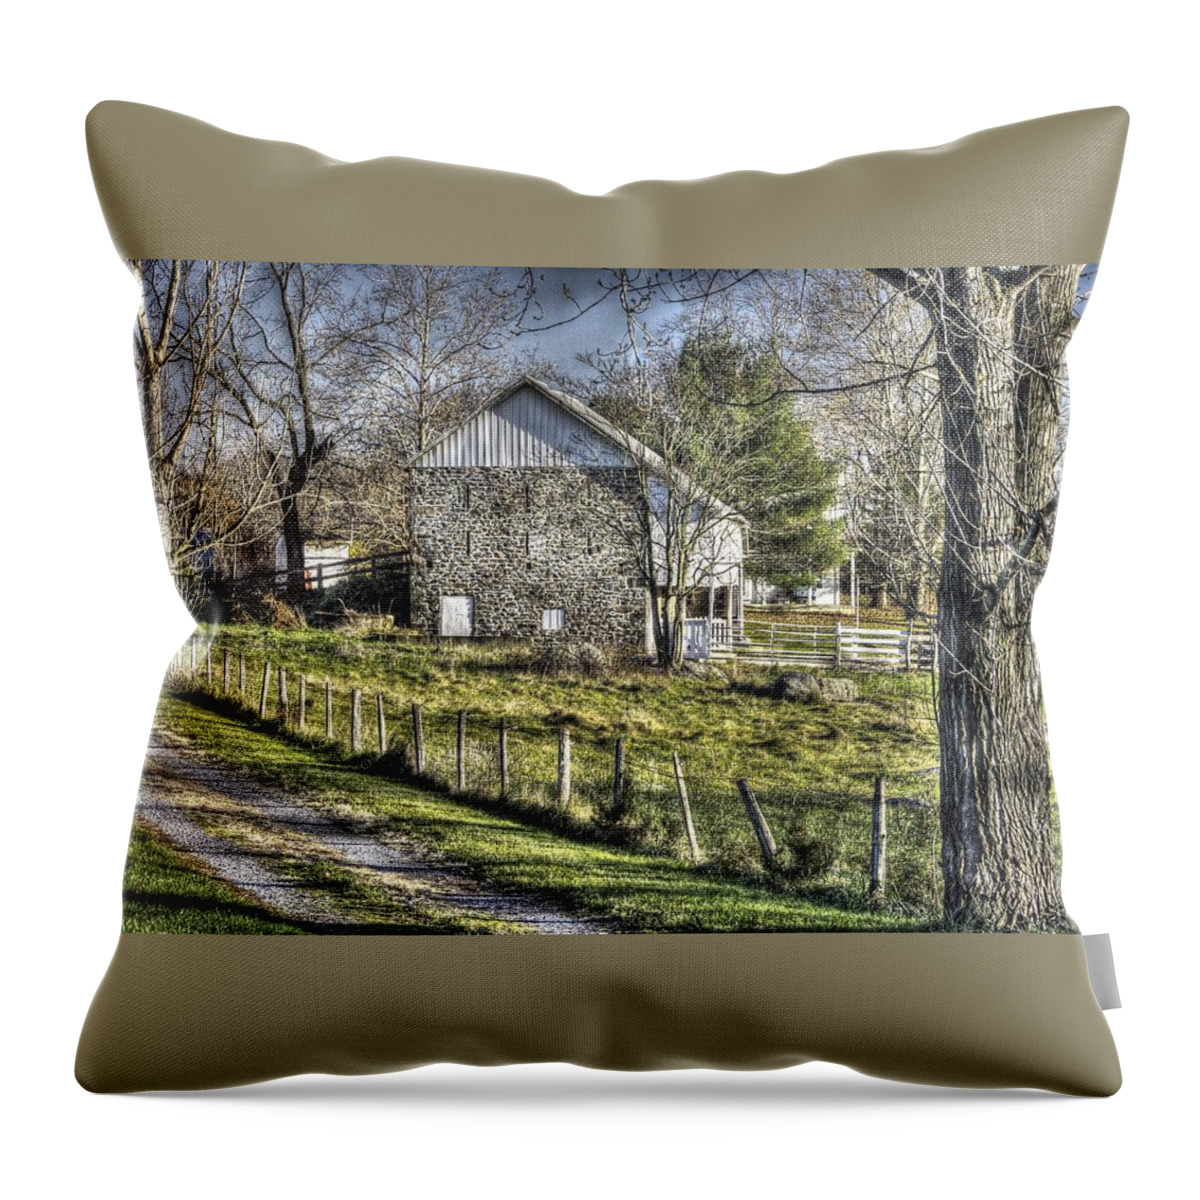 Gettysburg Throw Pillow featuring the photograph Gettysburg at Rest - Sarah Patterson Farm Field Hospital Muted by Michael Mazaika